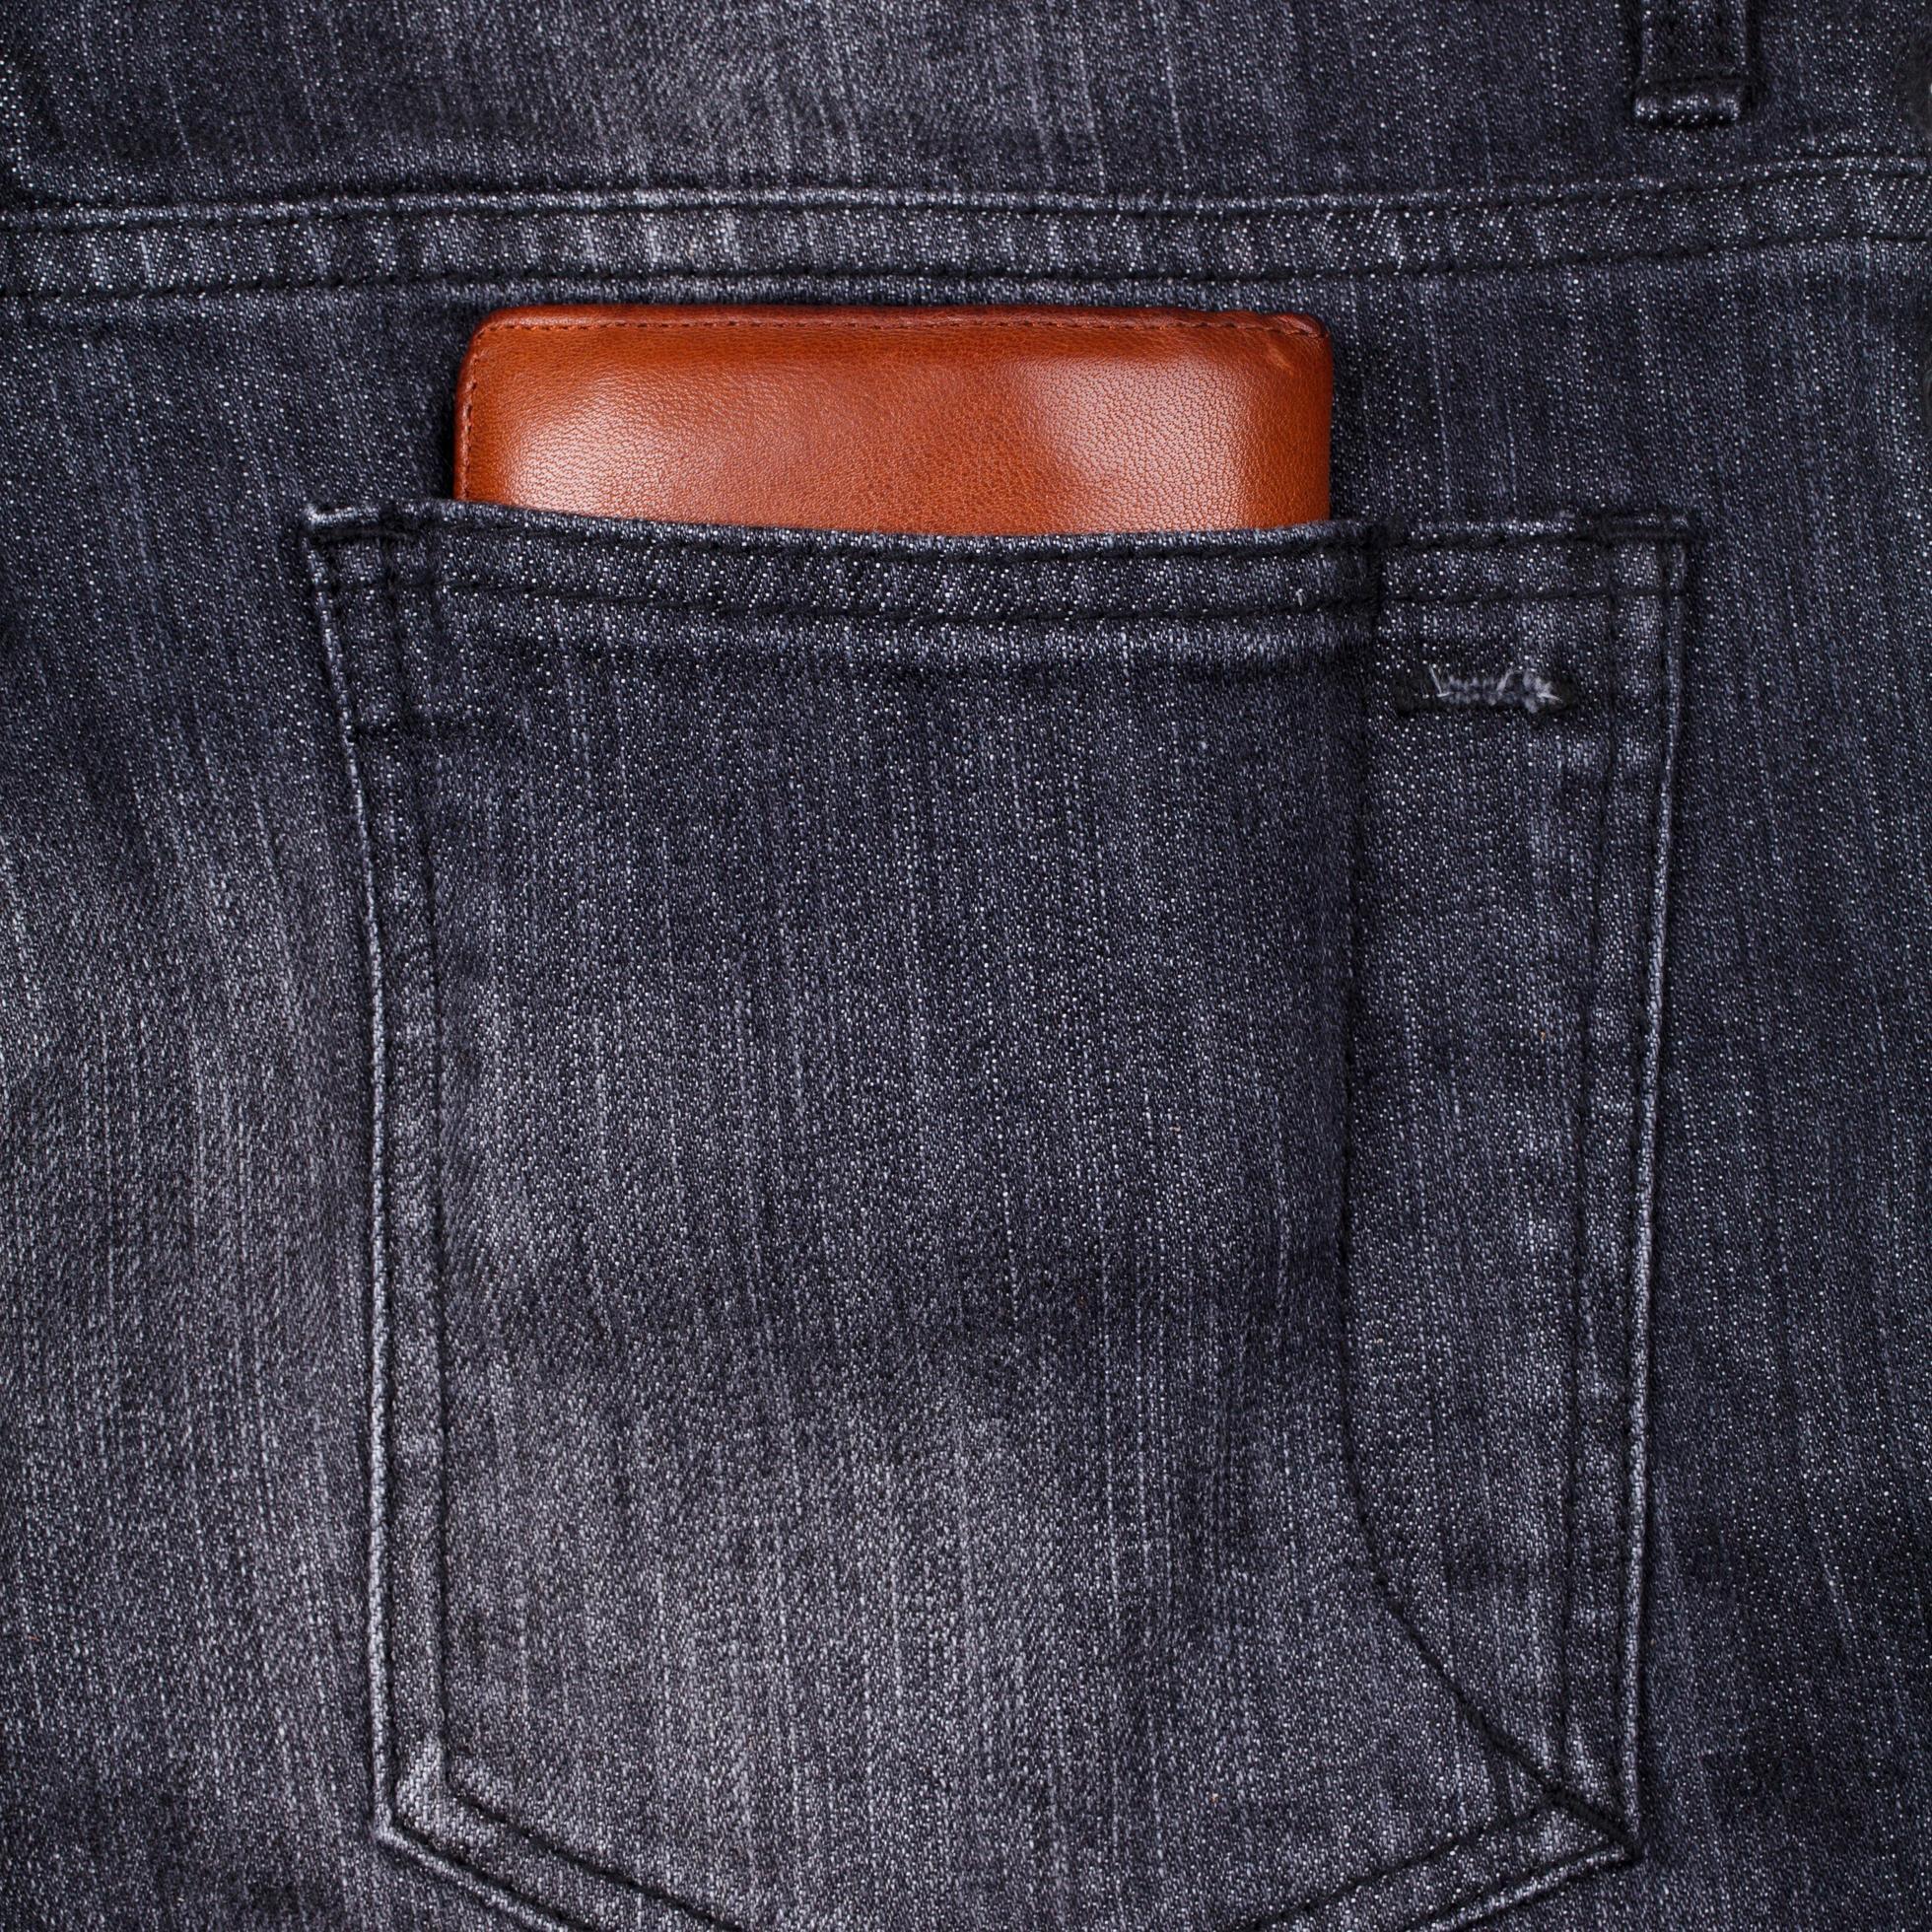 Wallet in jeans back pocket 9806202 Stock Photo at Vecteezy